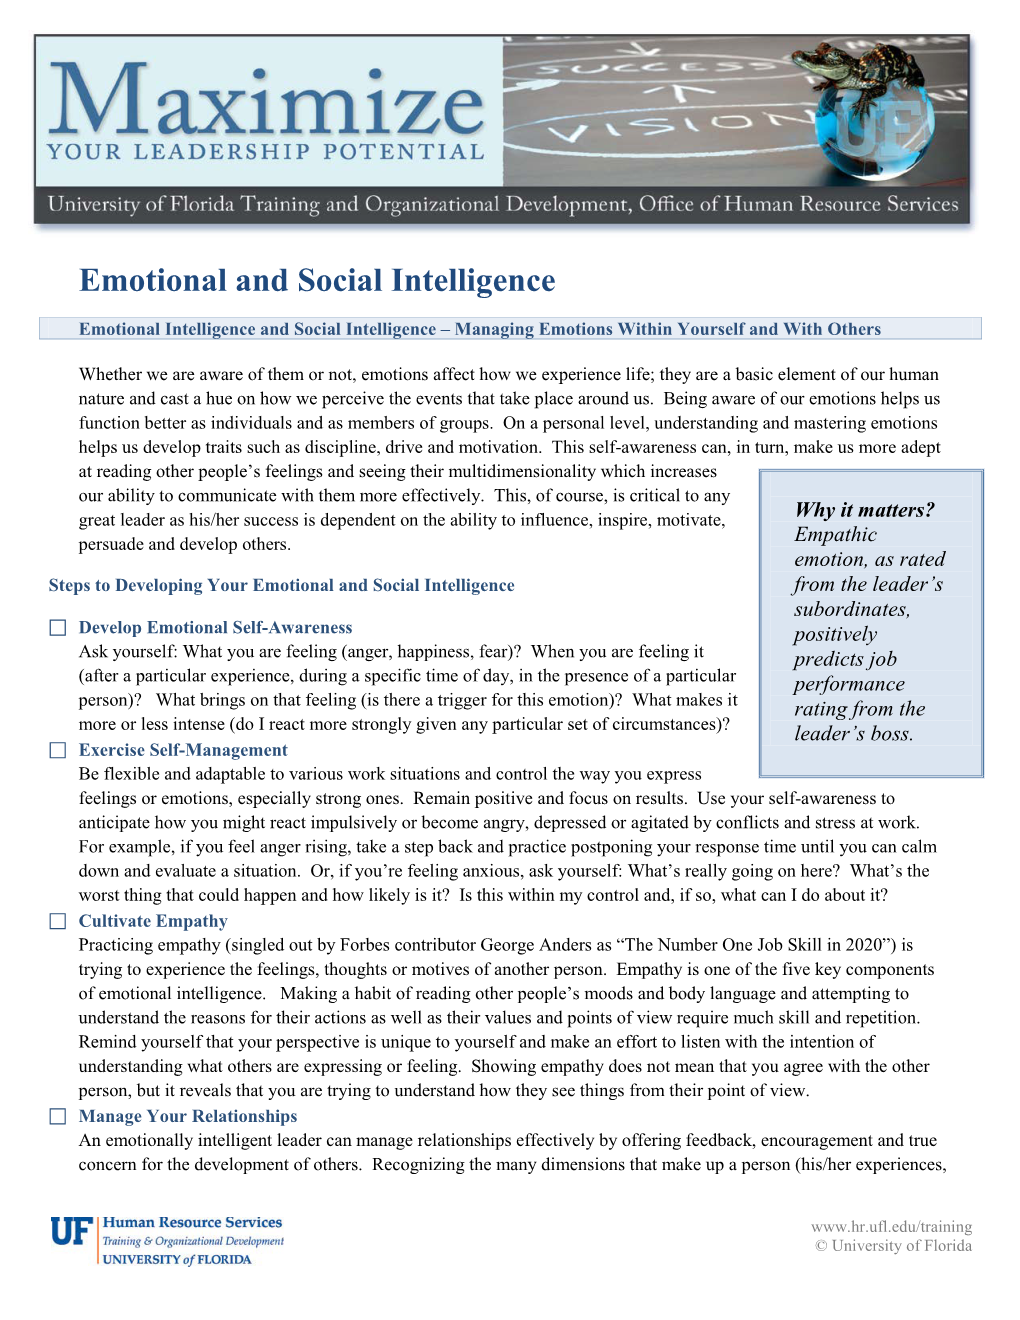 Emotional and Social Intelligence